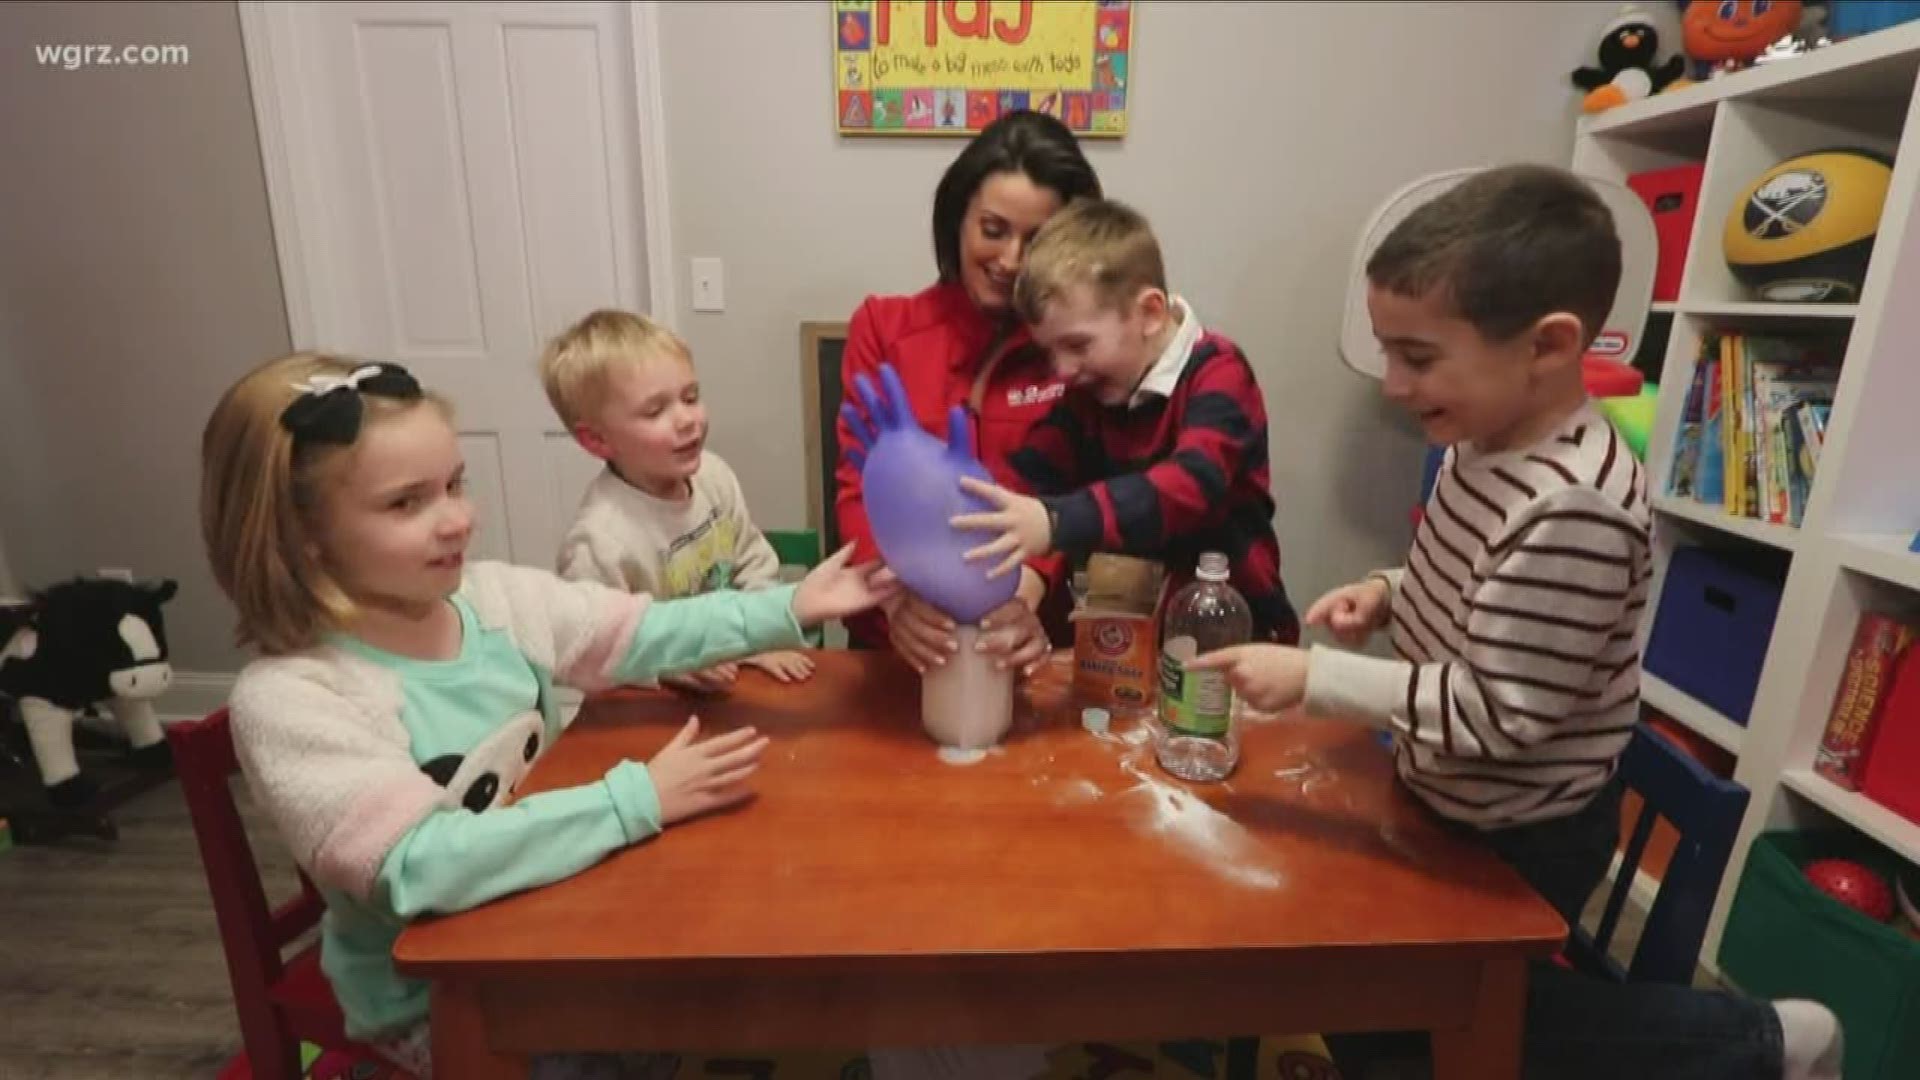 With the kids home from school all week, Daybreak is supplying at-home fun and learning through science experiments. Tuesday features chemical reactions!